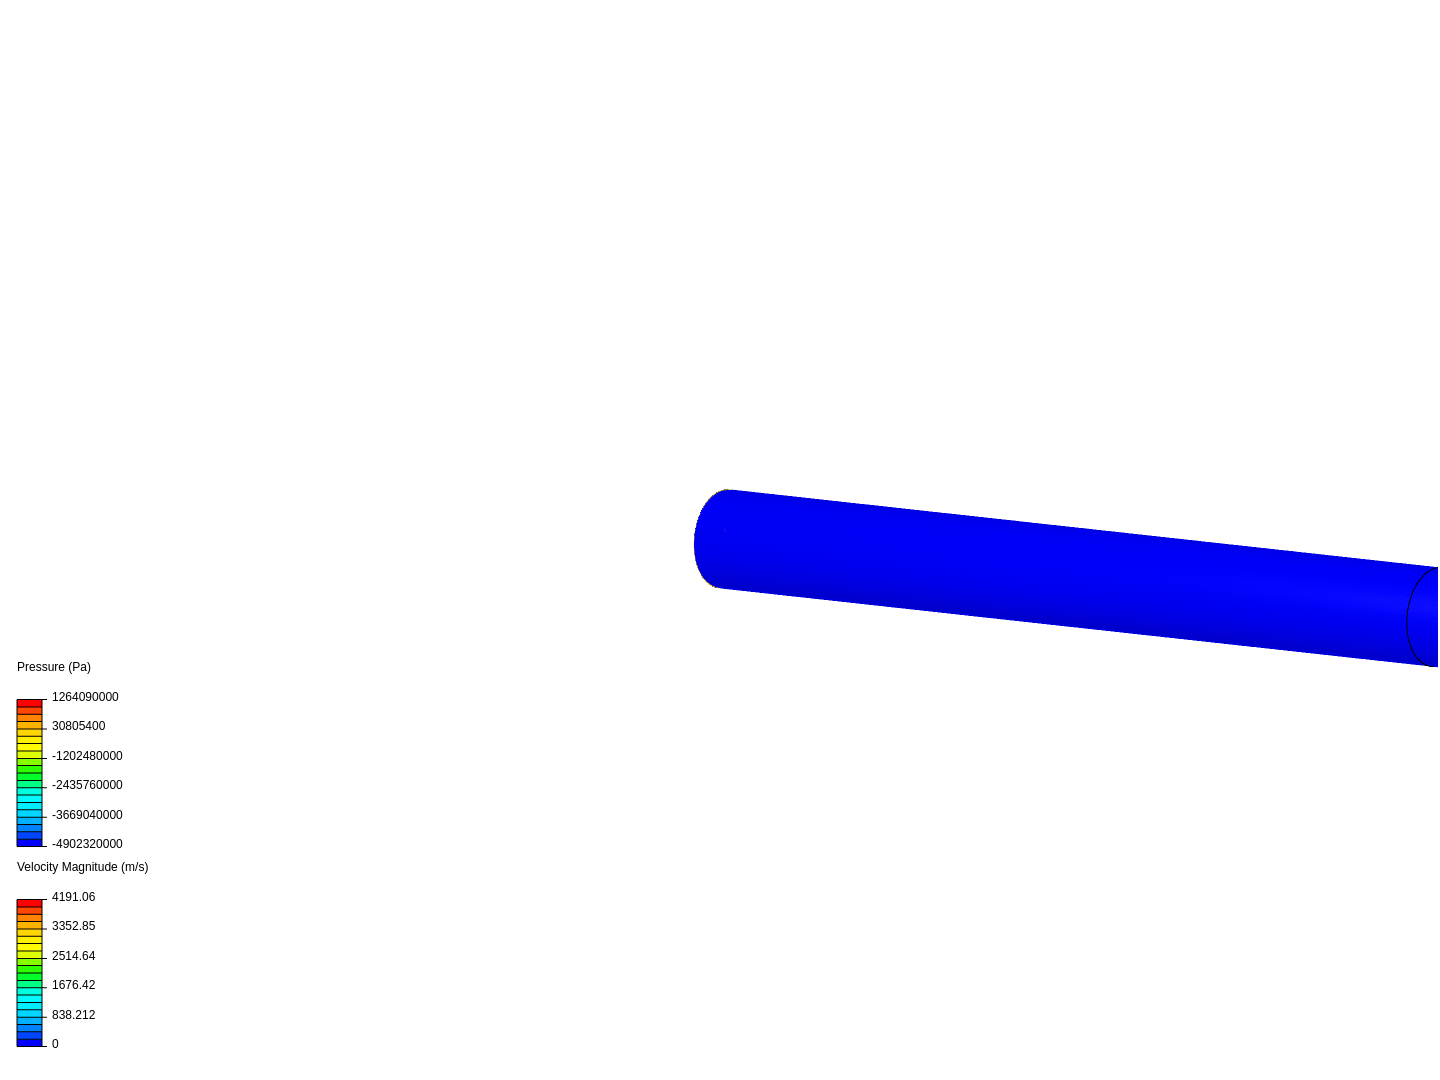 Cfd flow in pipe image